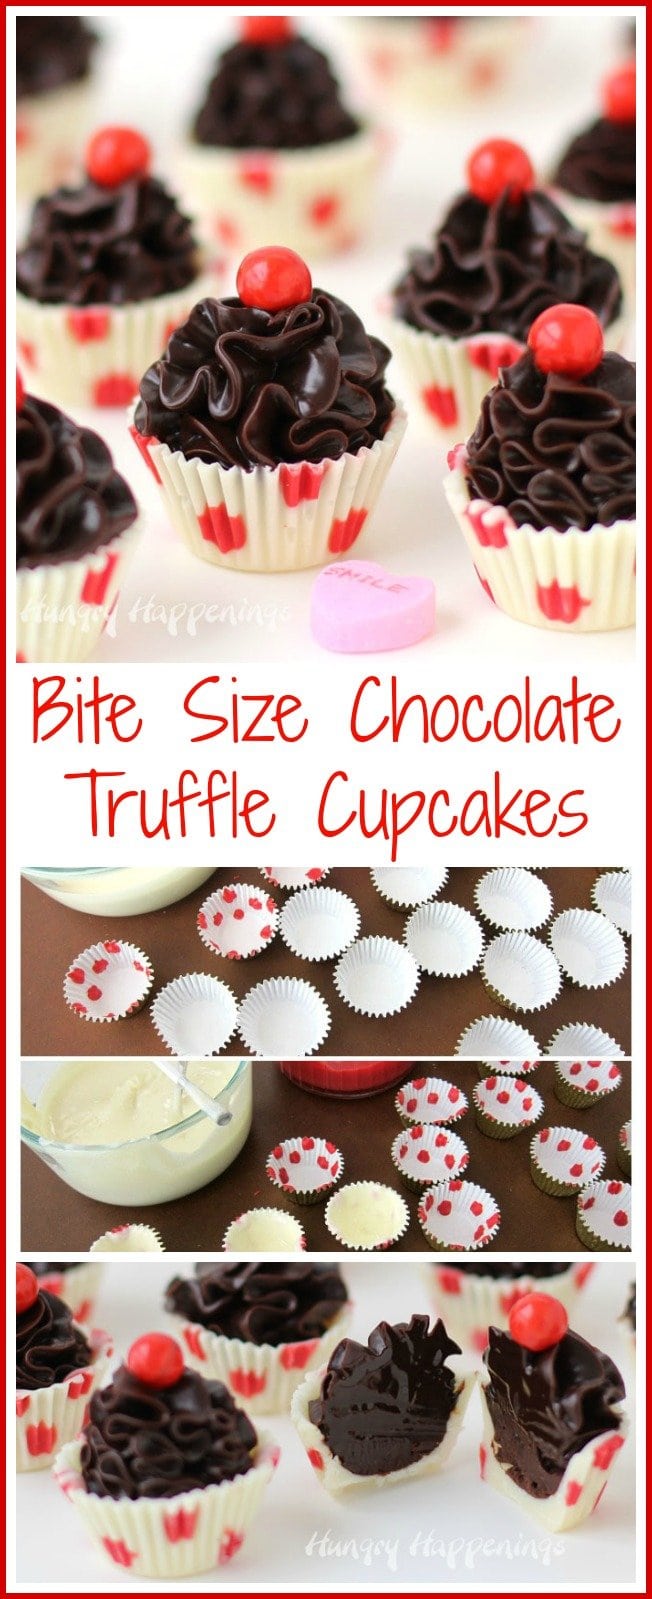 Bite Size Chocolate Truffle Cupcakes - Make cute little white chocolate cups decorated with red polka dots then fill them with chocolate ganache. 